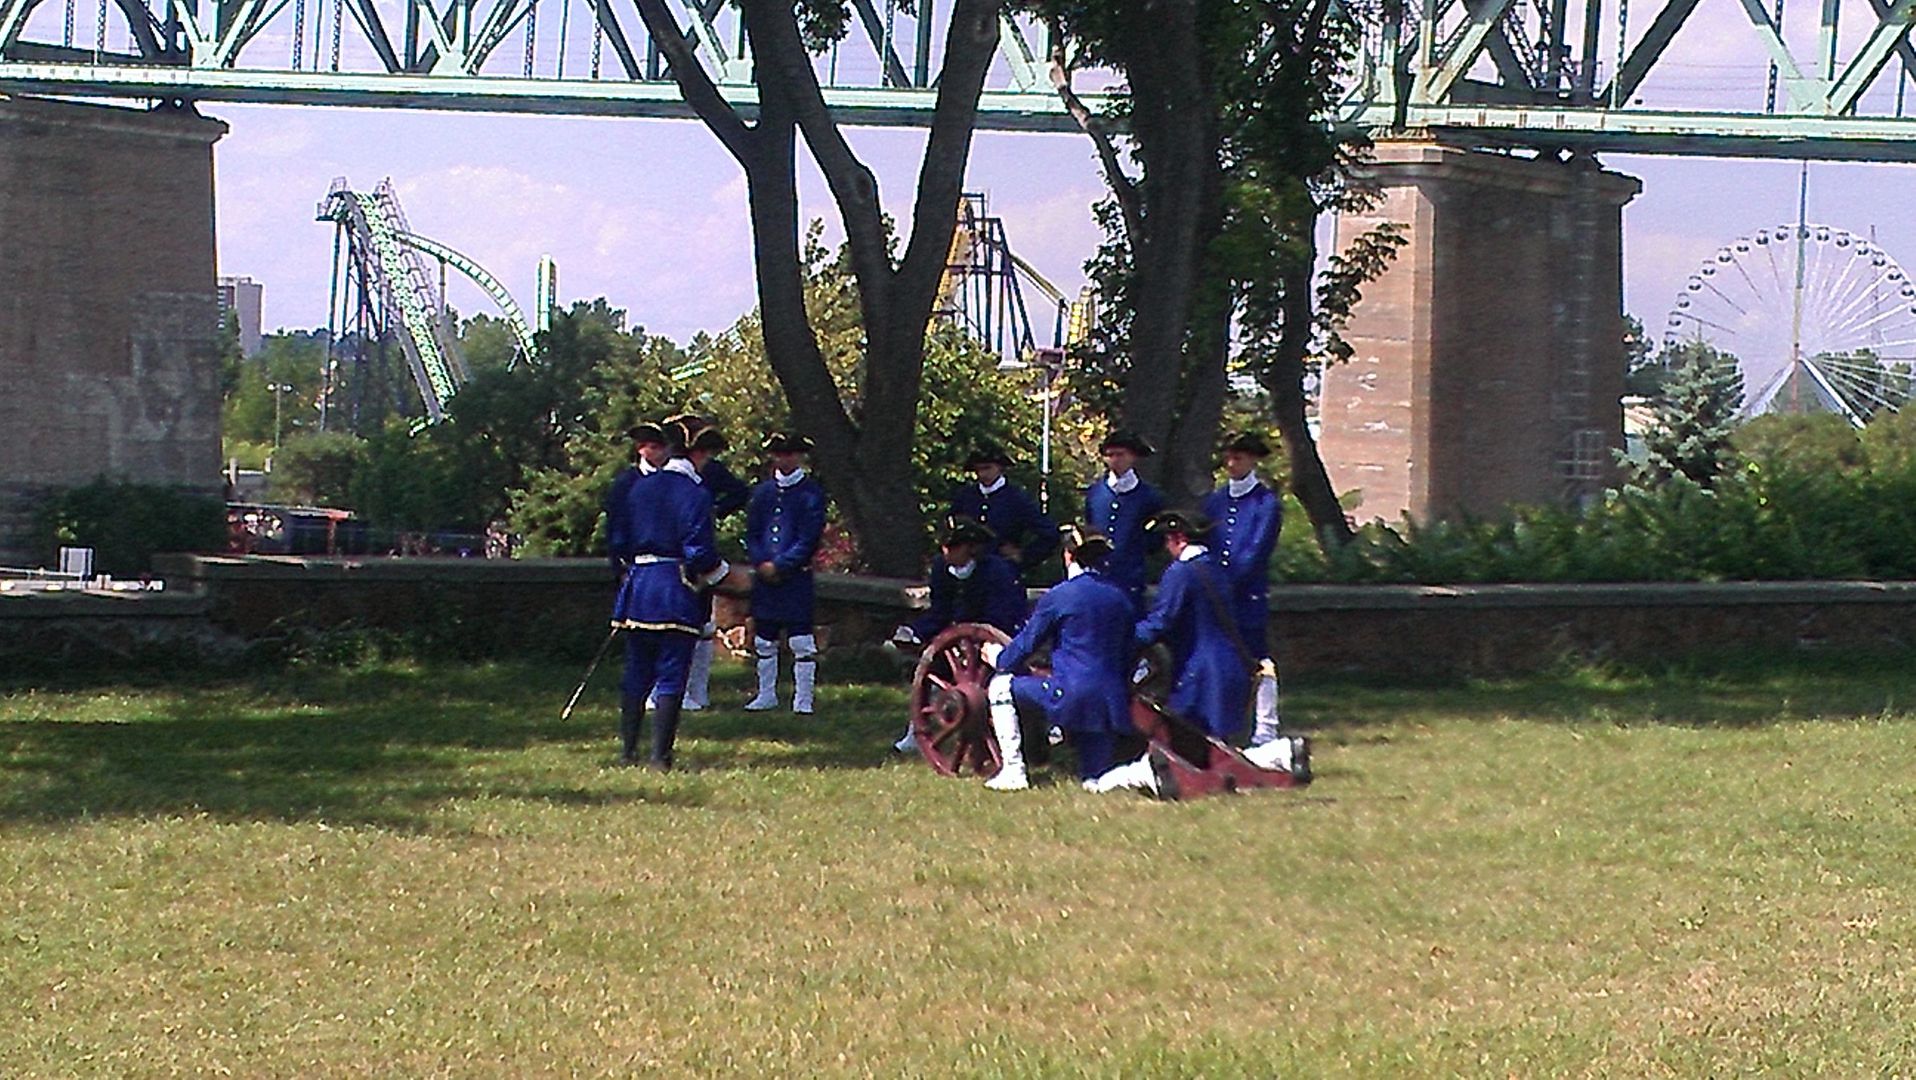 Official Stewart Museum cosplayers: Soldiers at the Stewart Museum prepare to fire upon the La Ronde amusement park.